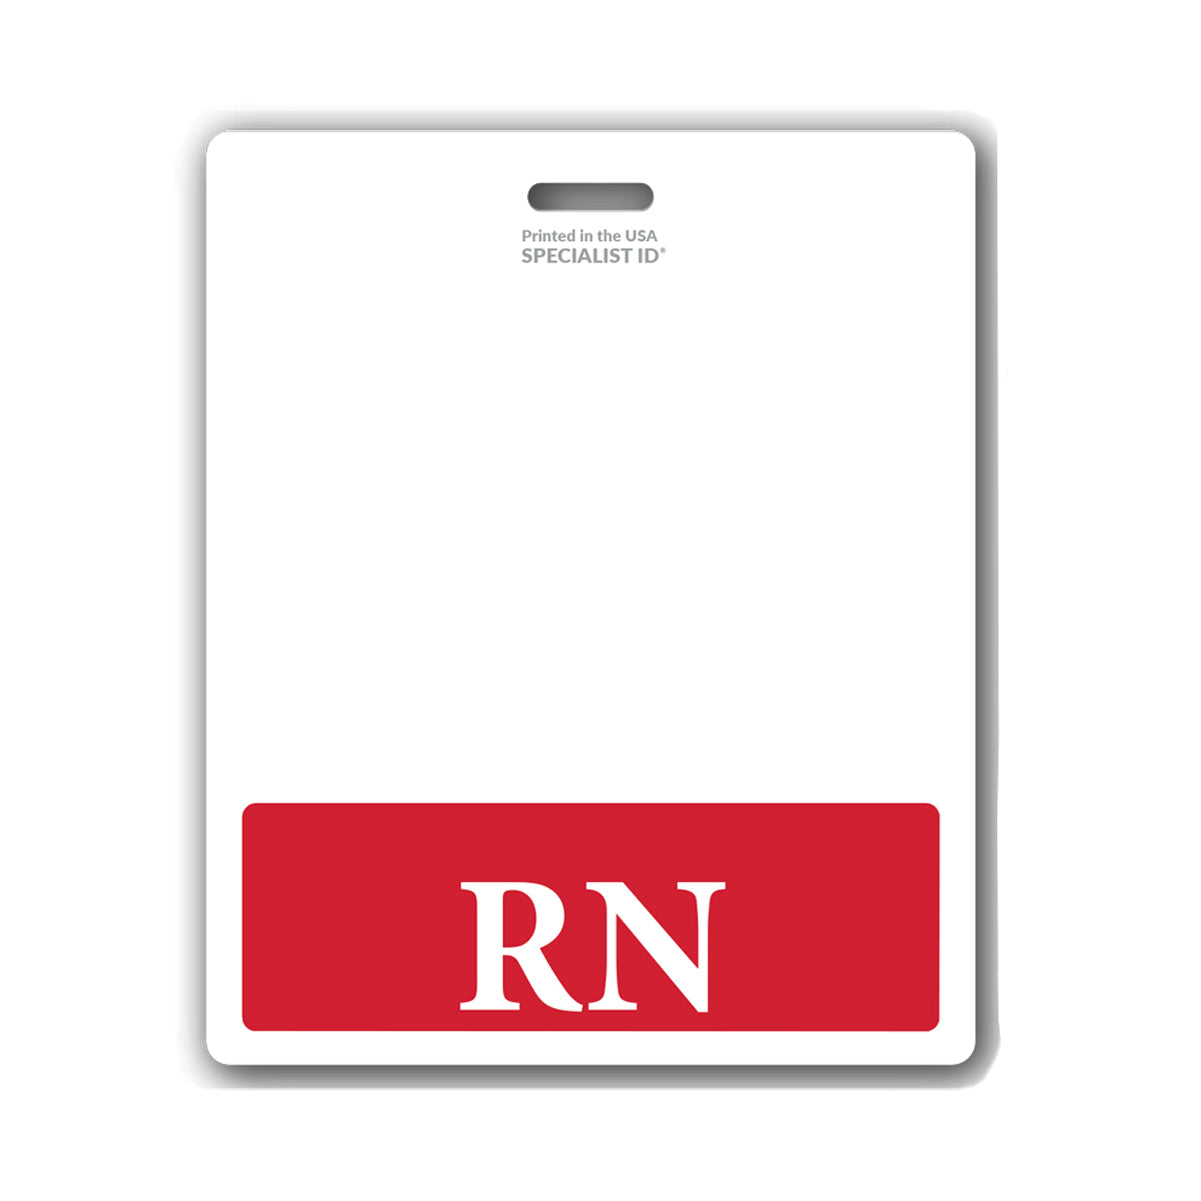 A horizontal hospital ID features a white badge with a red section at the bottom containing the letters "RN" in white. The top reads "Printed in the USA SPECIALIST ID". Extra Large RN Badge Buddy - XL Badge Backer for Registered Nurse - Horizontal Hospital ID Badge Buddies